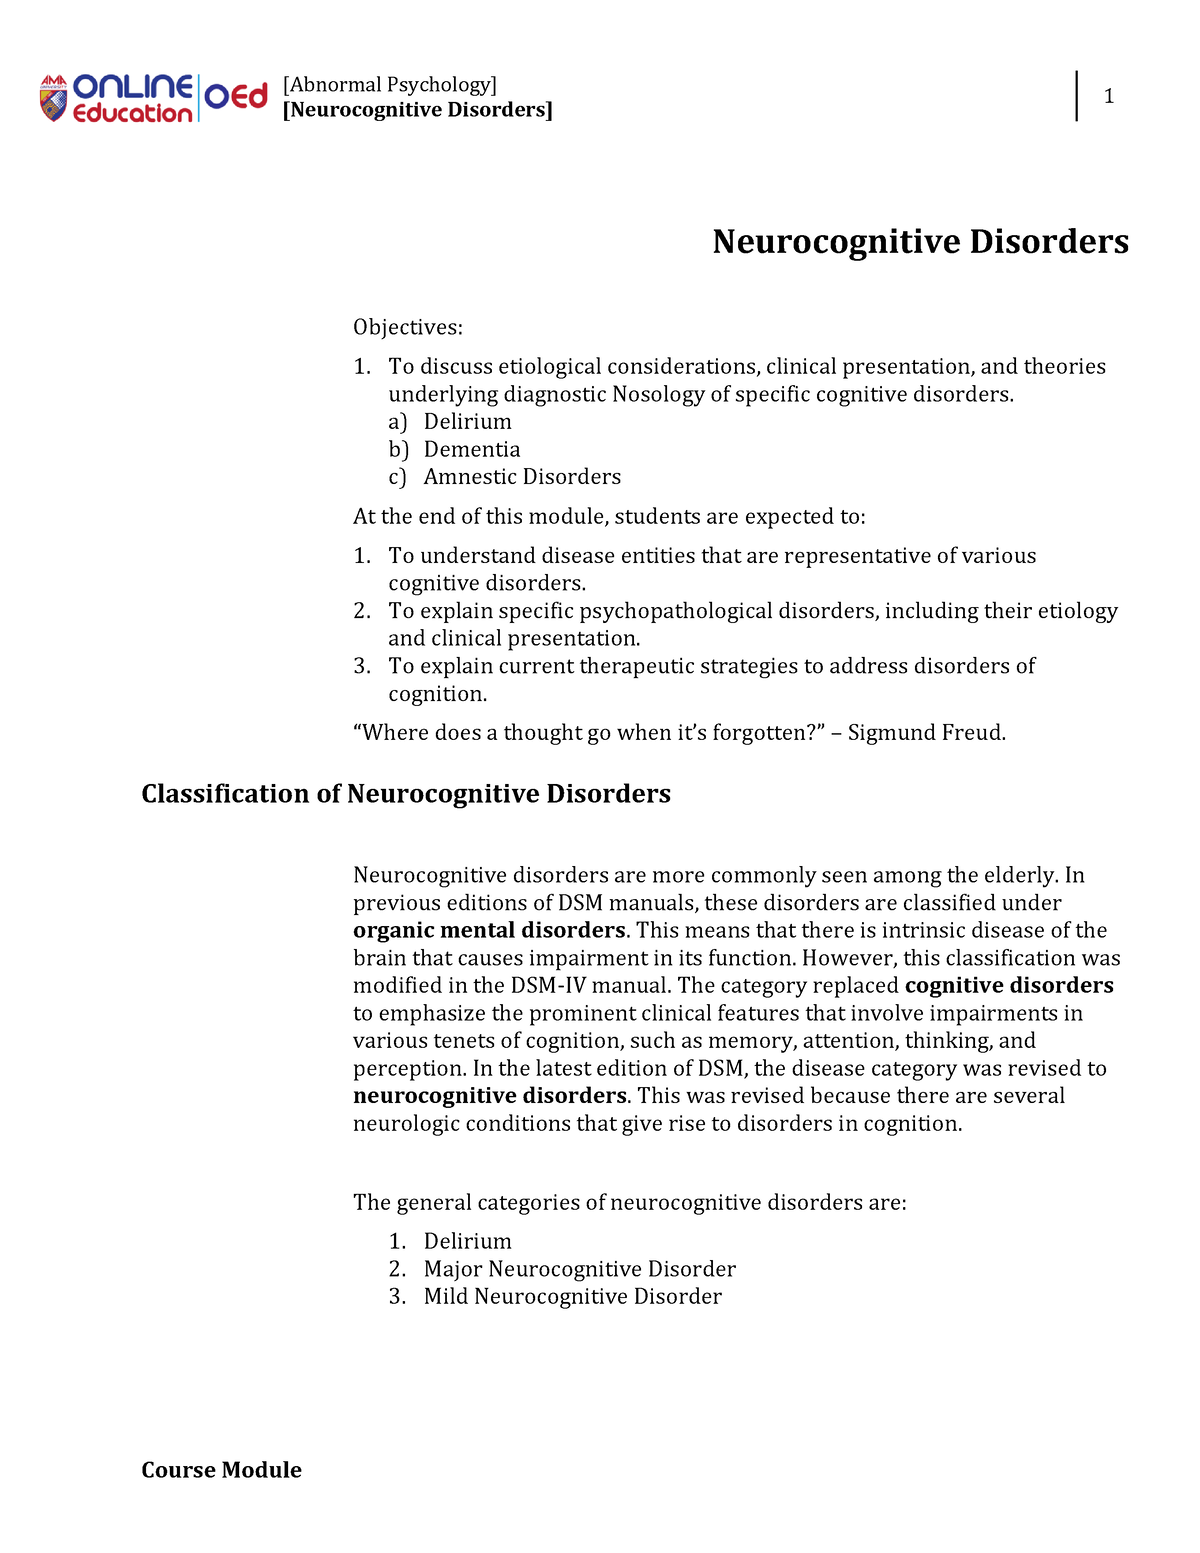 case study 1 for neurocognitive disorders alex